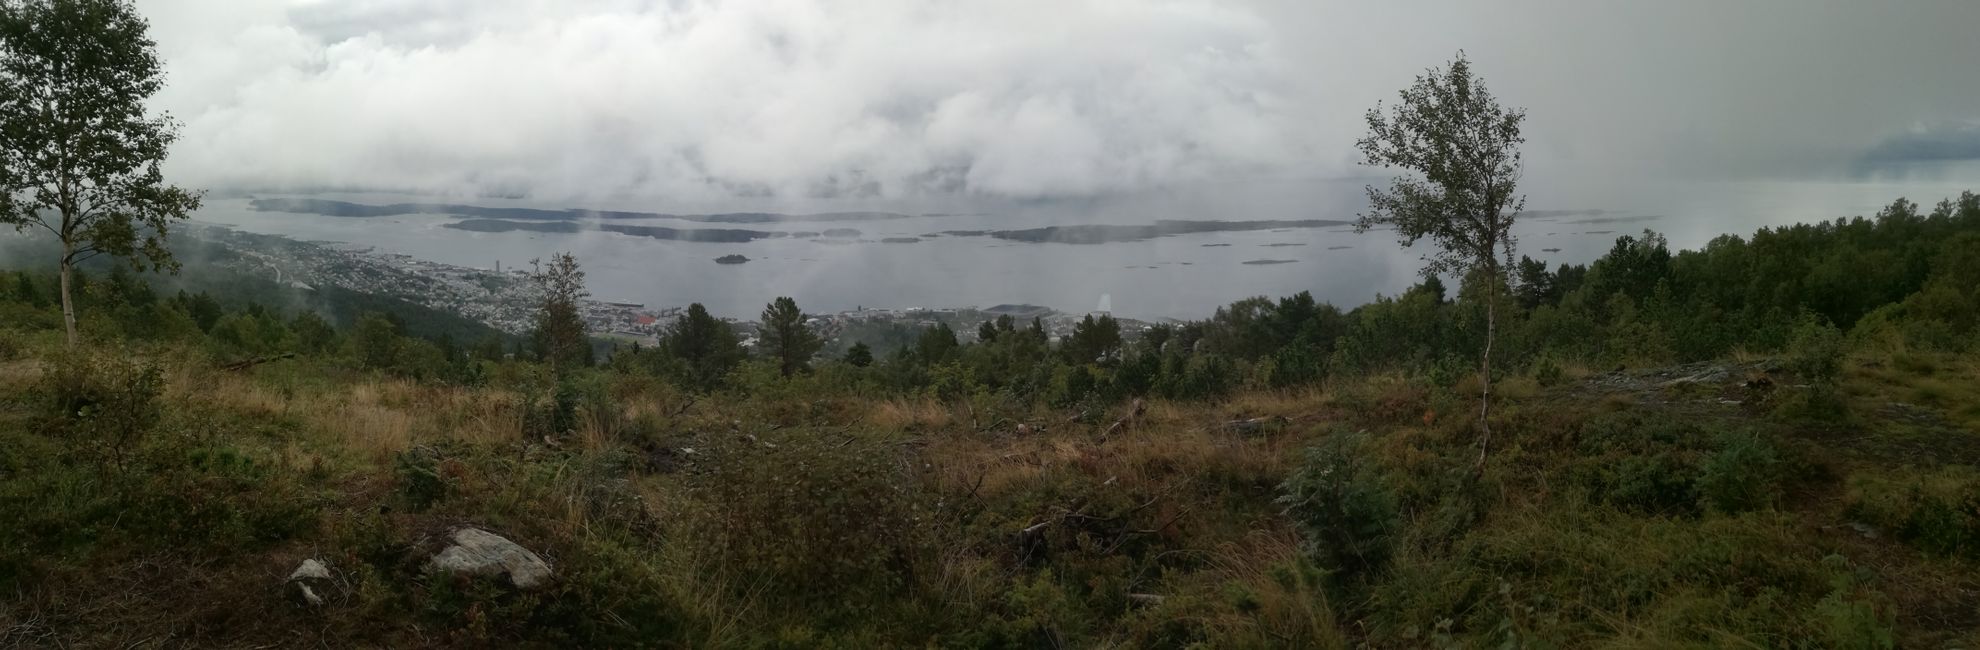 'View' of Molde from Varden